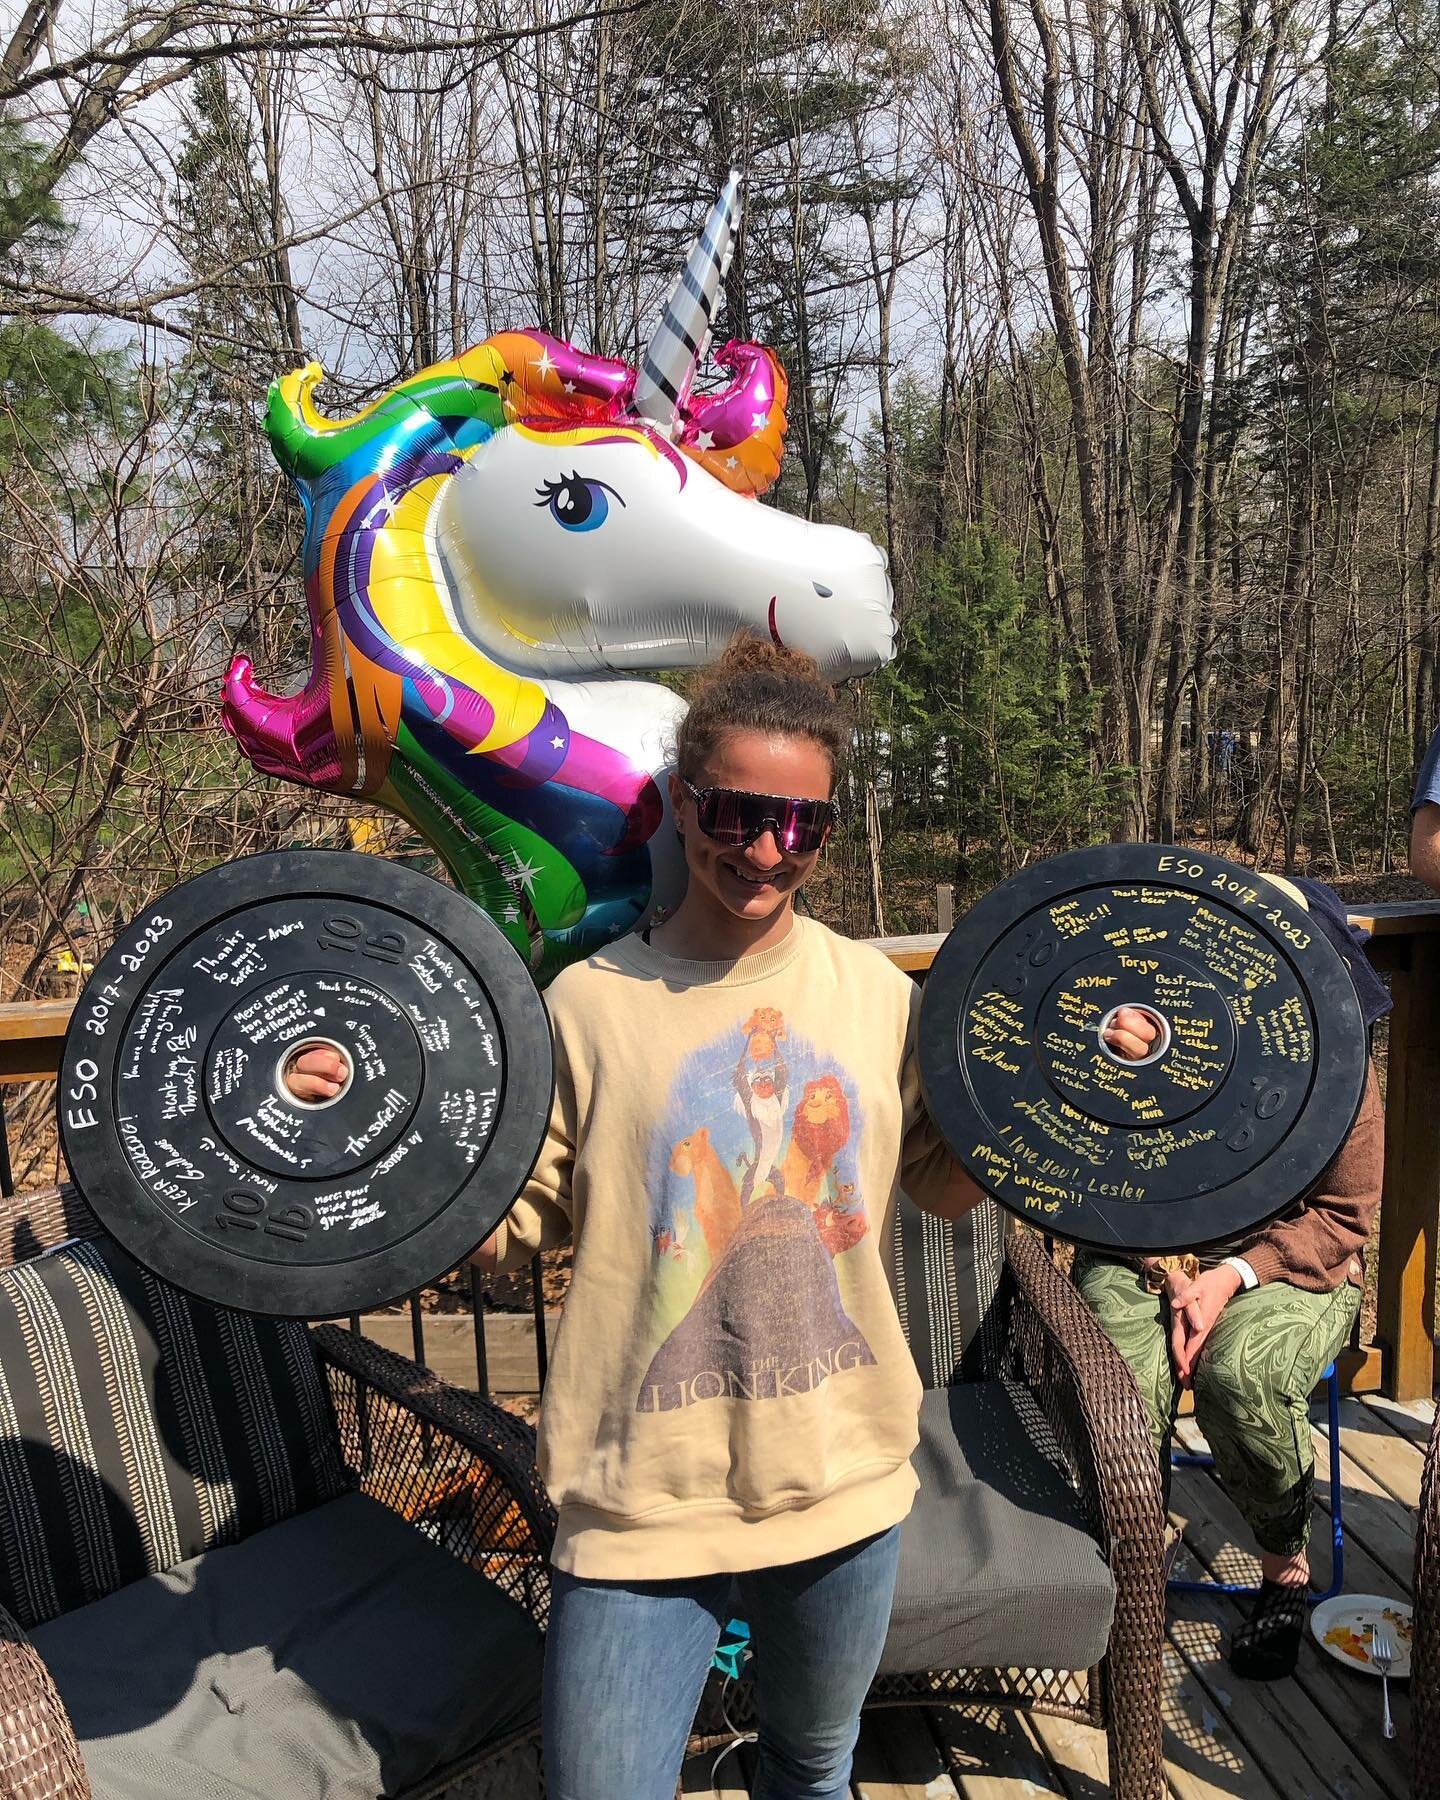 Sophie has been coaching with us since 2017. She will be missed as she is an amazing coach. She is heading on to new adventures and new missions. 

Merci to the best coaching Unicorn on the planet.